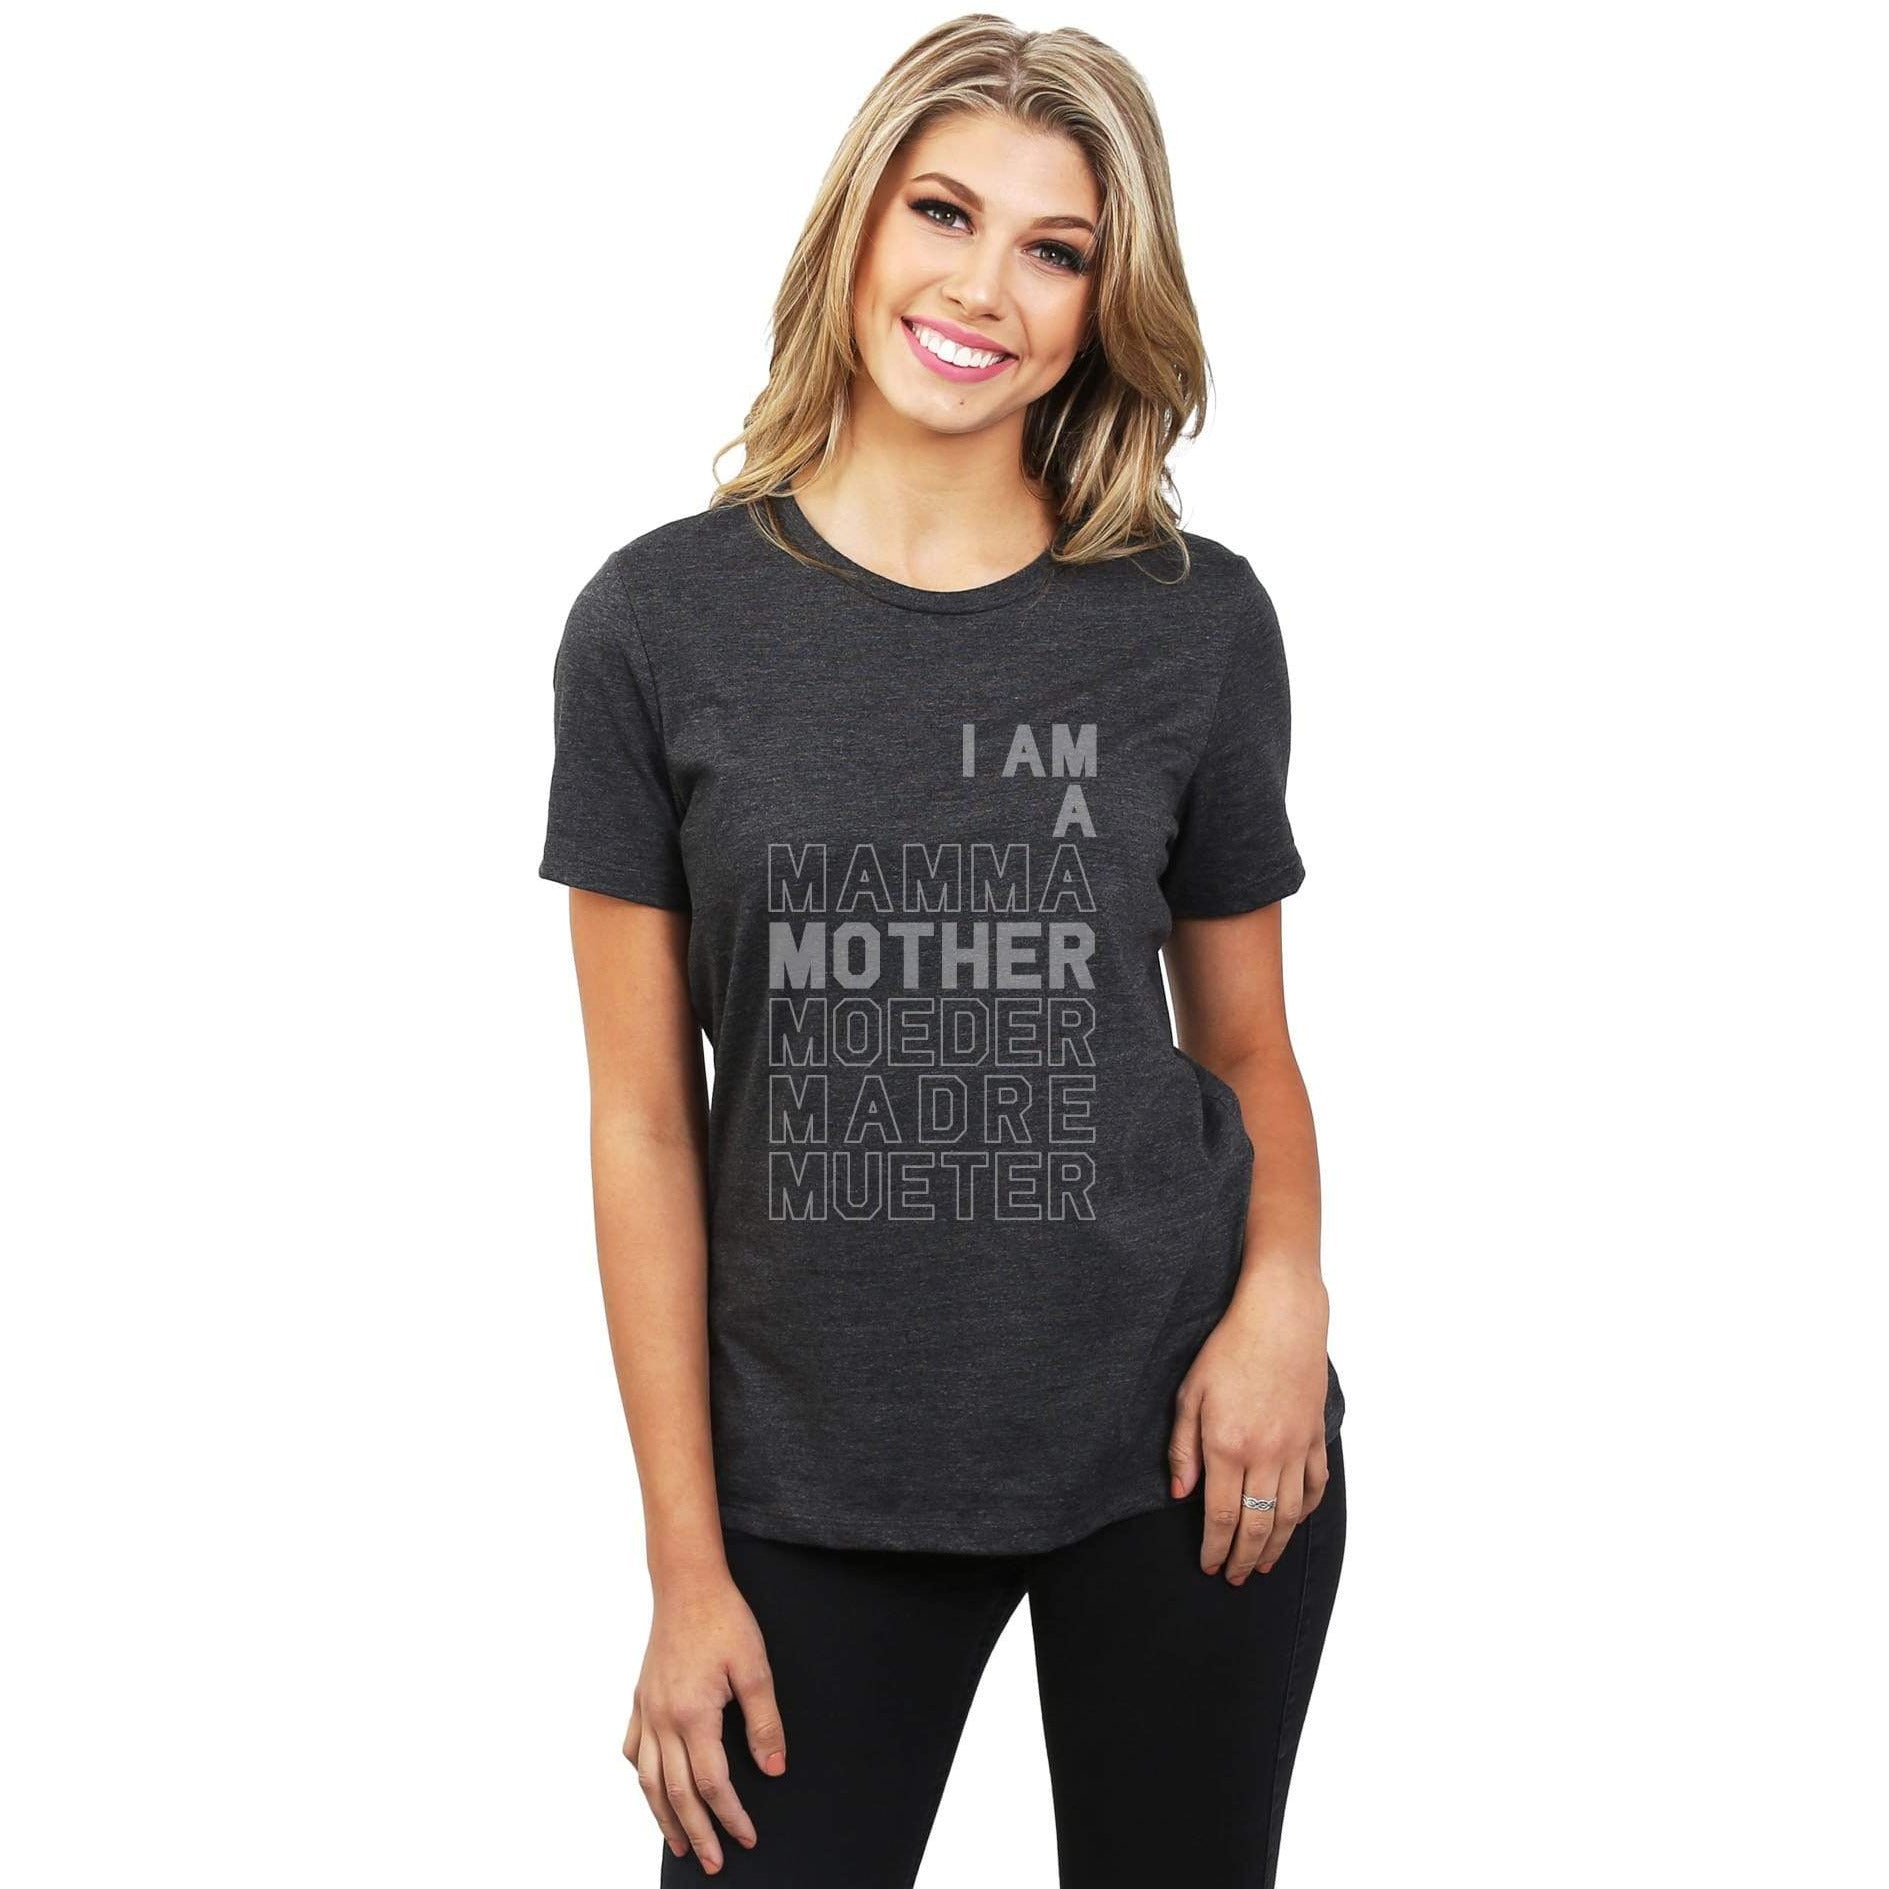 I Am A Mamma Mother Madre Women's Relaxed Crewneck T-Shirt Top Tee Charcoal Grey Model